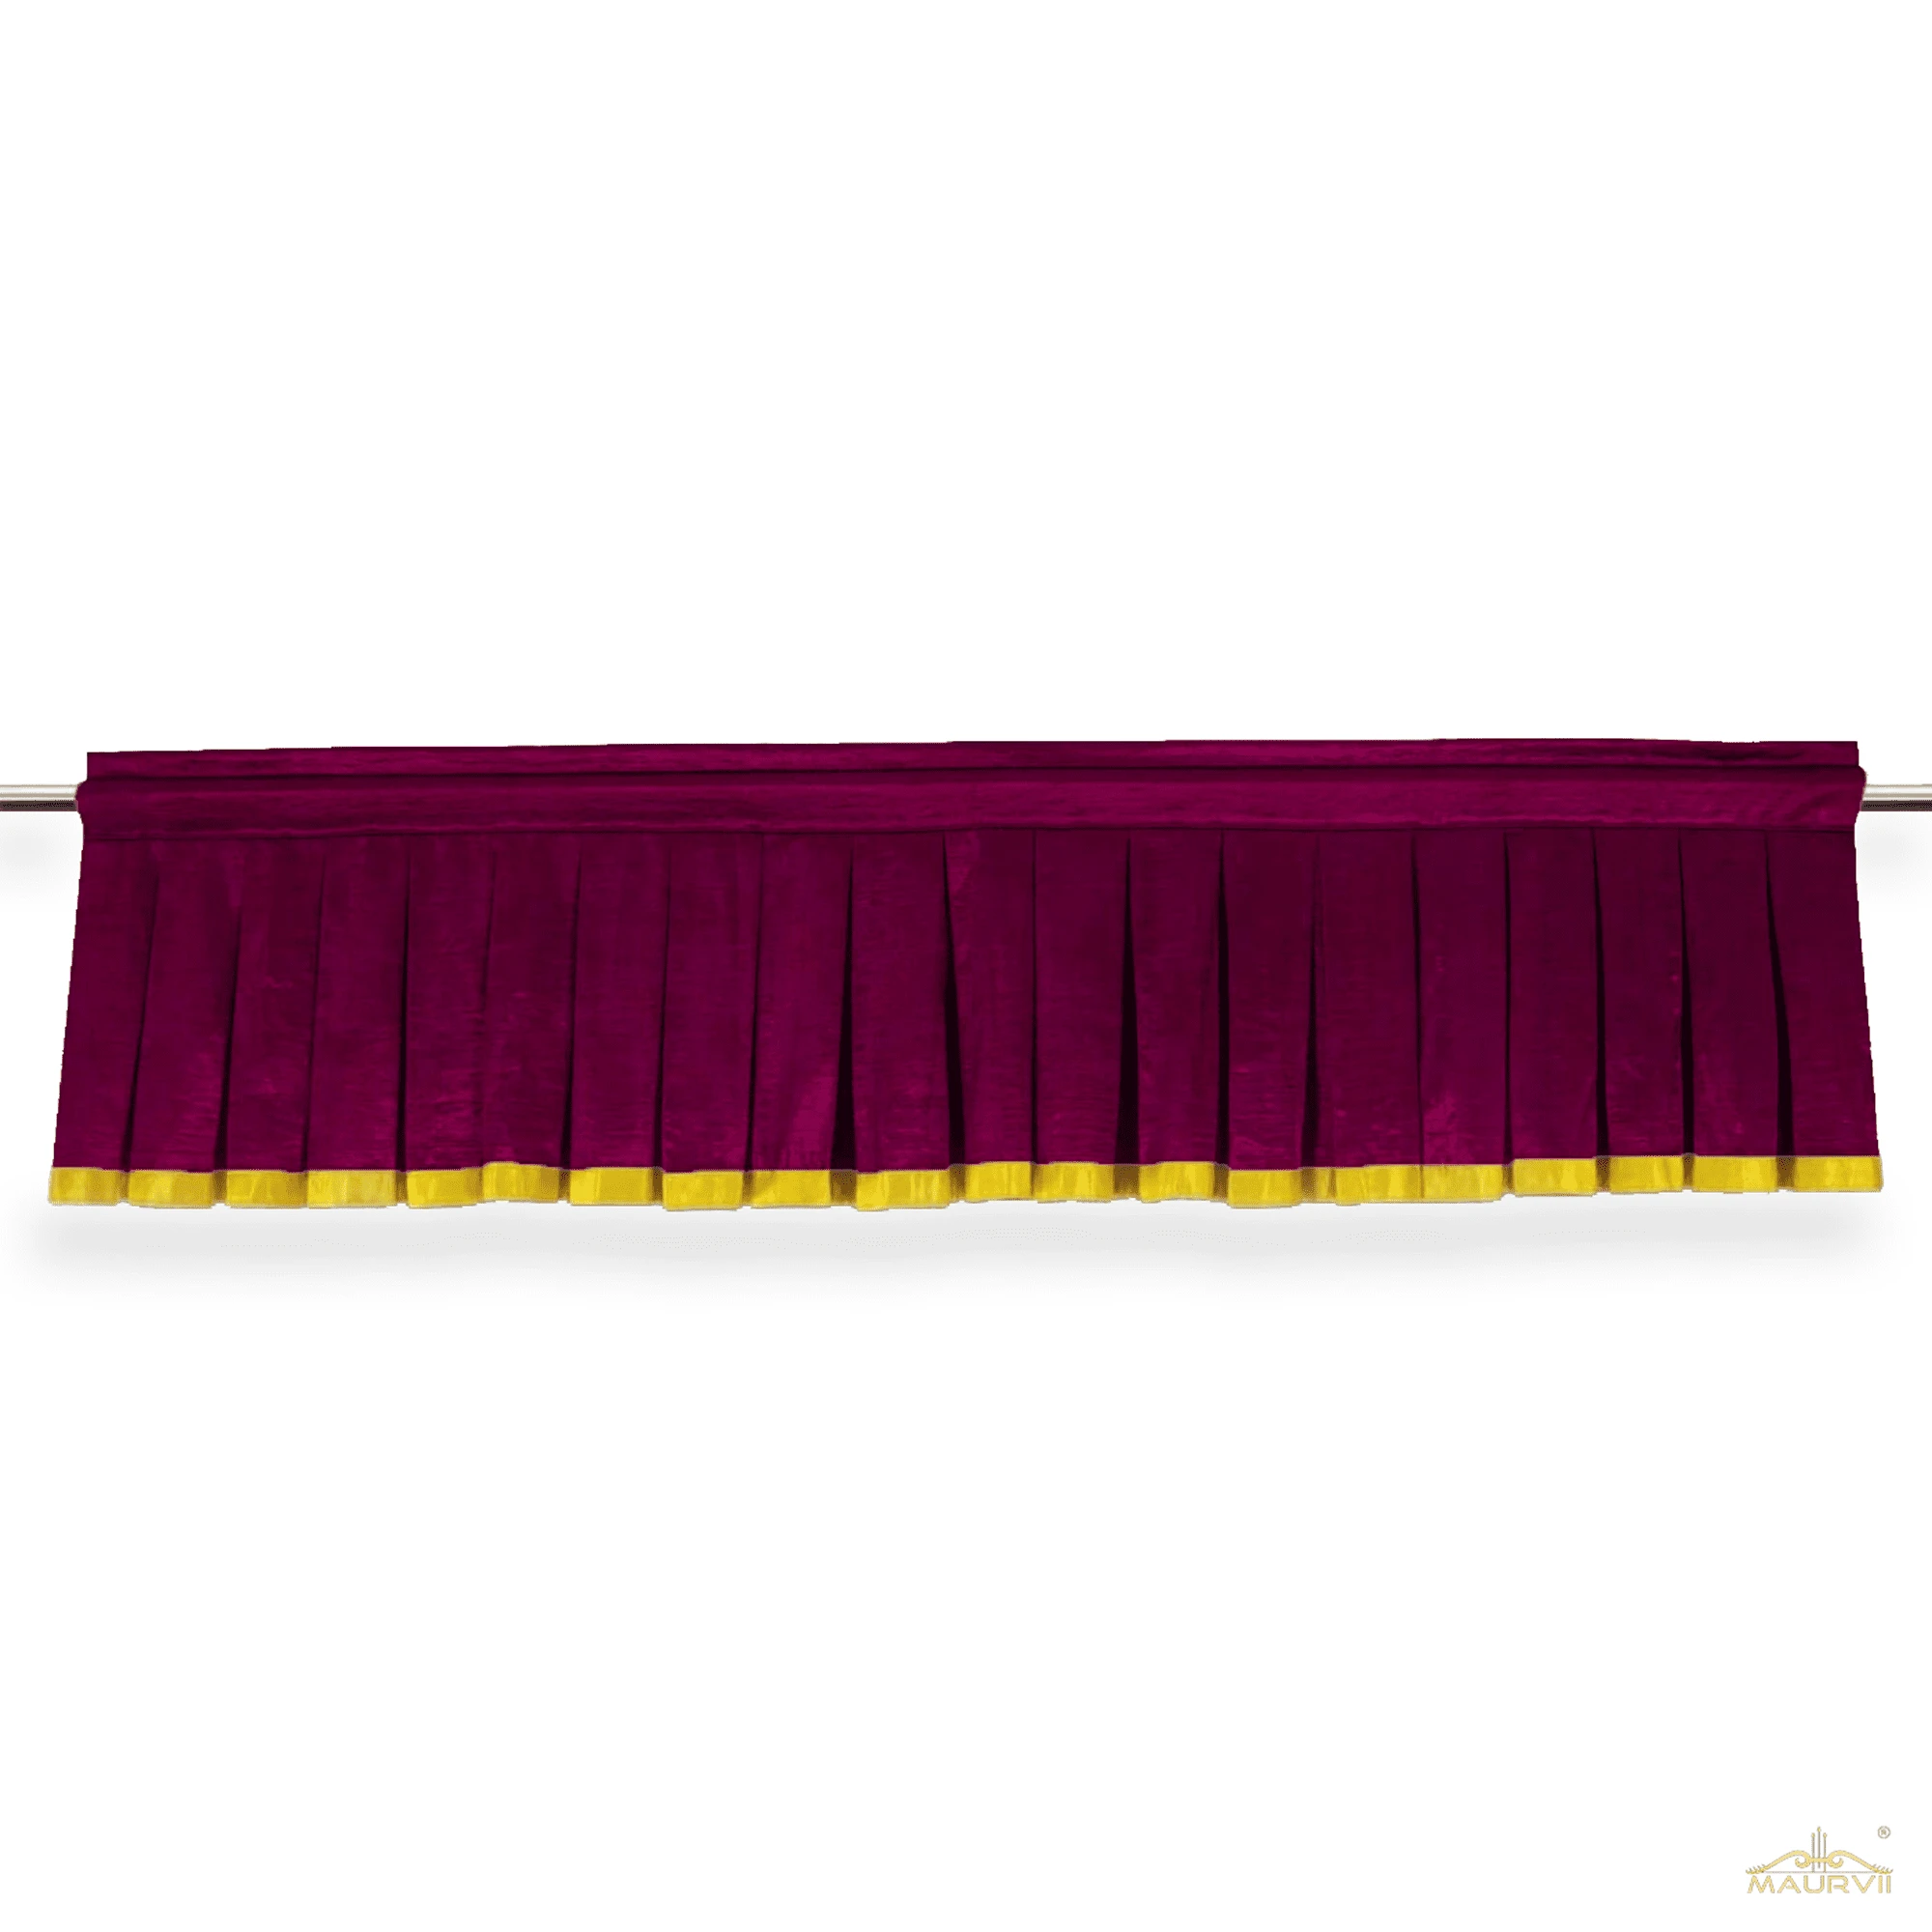 Box Pleated Valance Design With Golden Trim